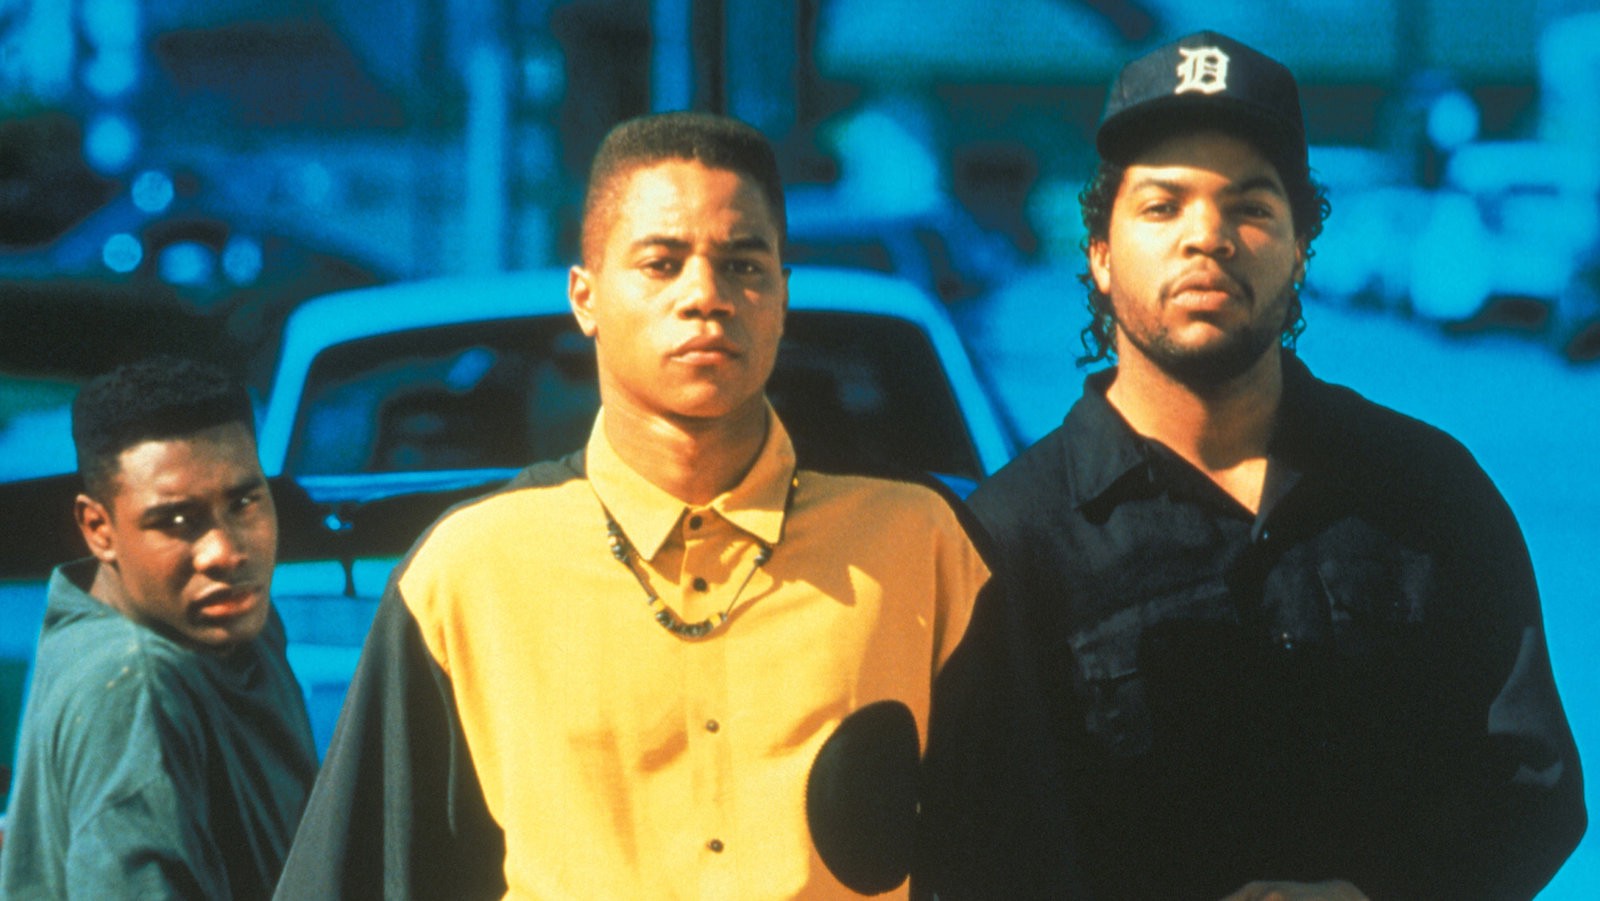 The image used on the promotional poster for Boyz n the Hood. From left to right: Morris Chestnut as Ricky, Cuba Gooding Jr. as Tre, and Ice Cube as Darren